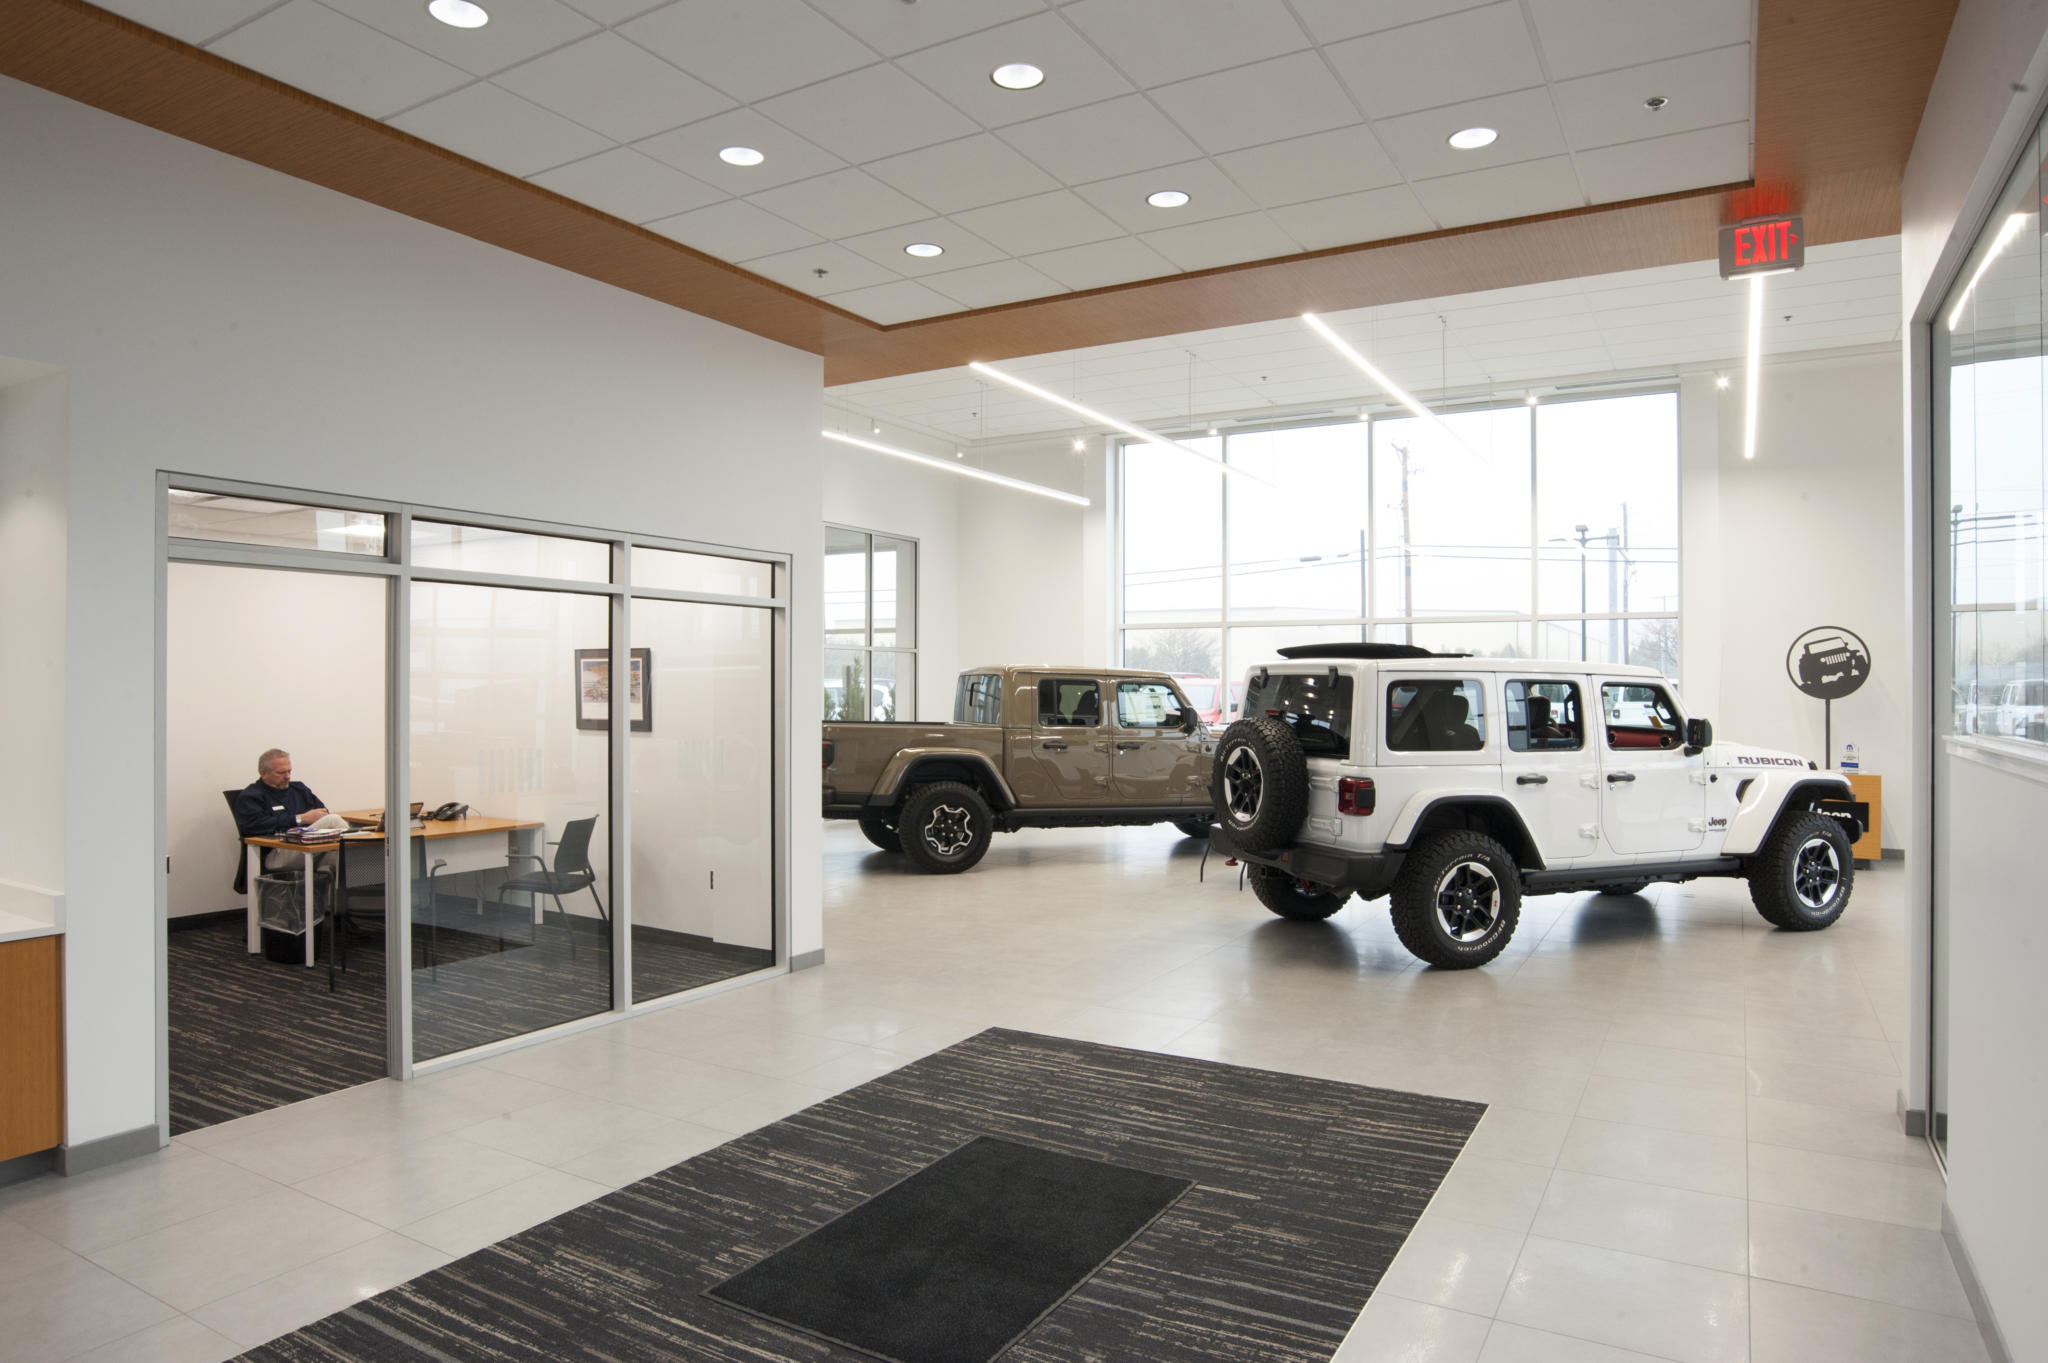 image of lobby with vehicles inside